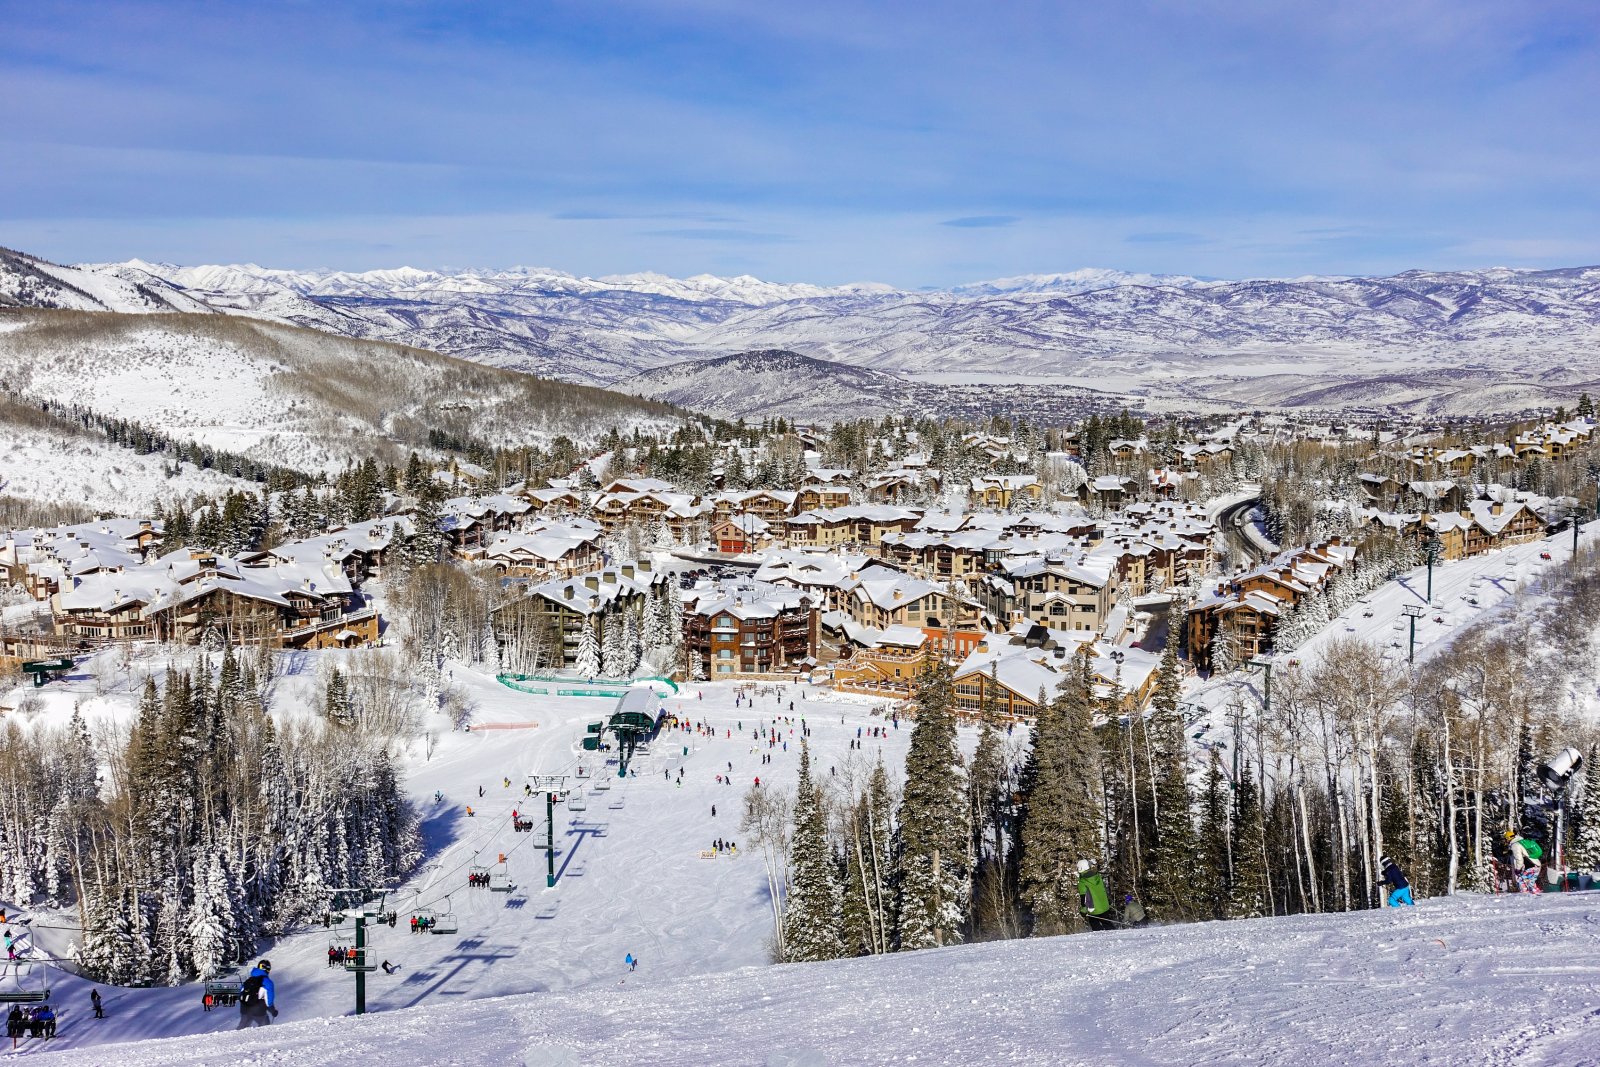 <p><span>Hit the slopes in style at Park City, with its world-class ski resorts and charming mountain village that exudes the ambiance of a European alpine town.</span></p>